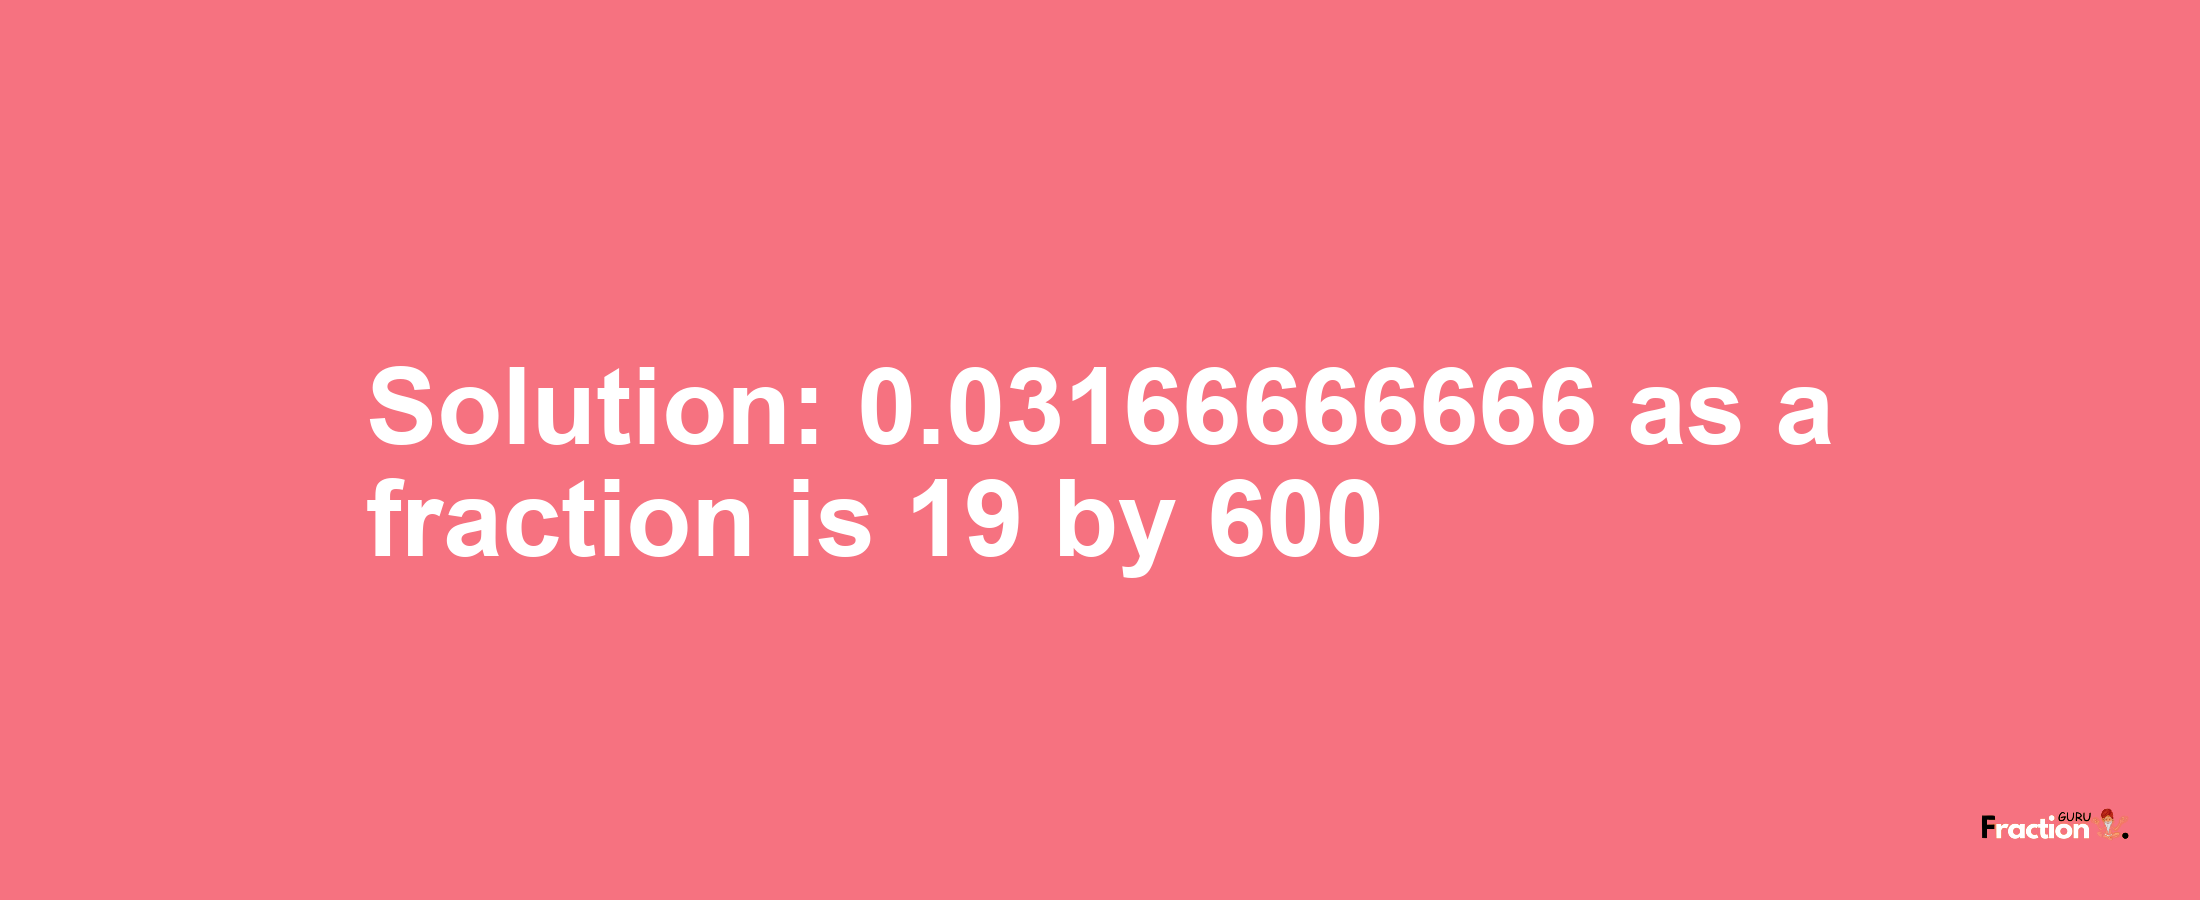 Solution:0.03166666666 as a fraction is 19/600